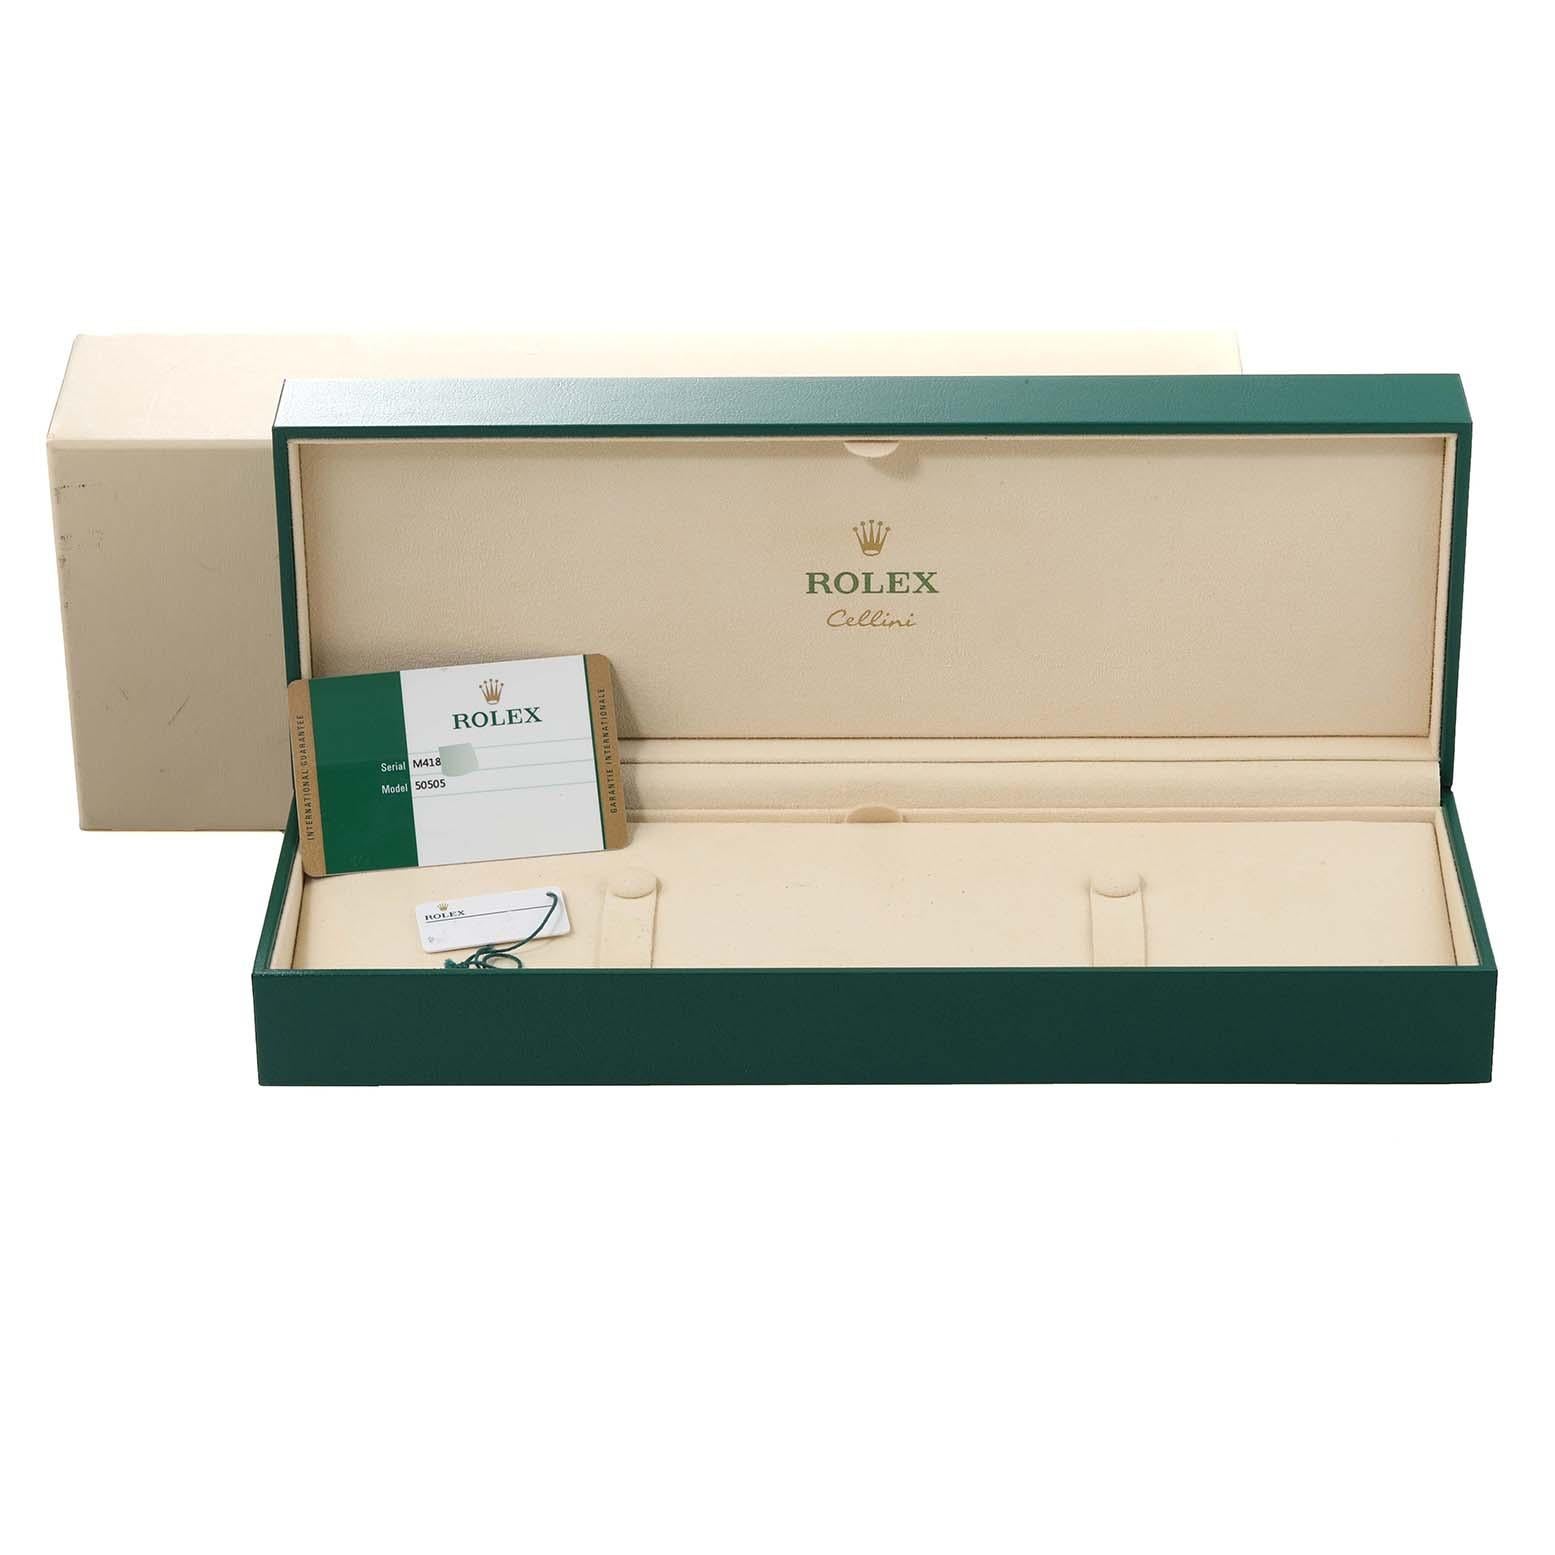 Rolex Cellini Time White Dial Rose Gold Mens Watch 50505 Box Card 5